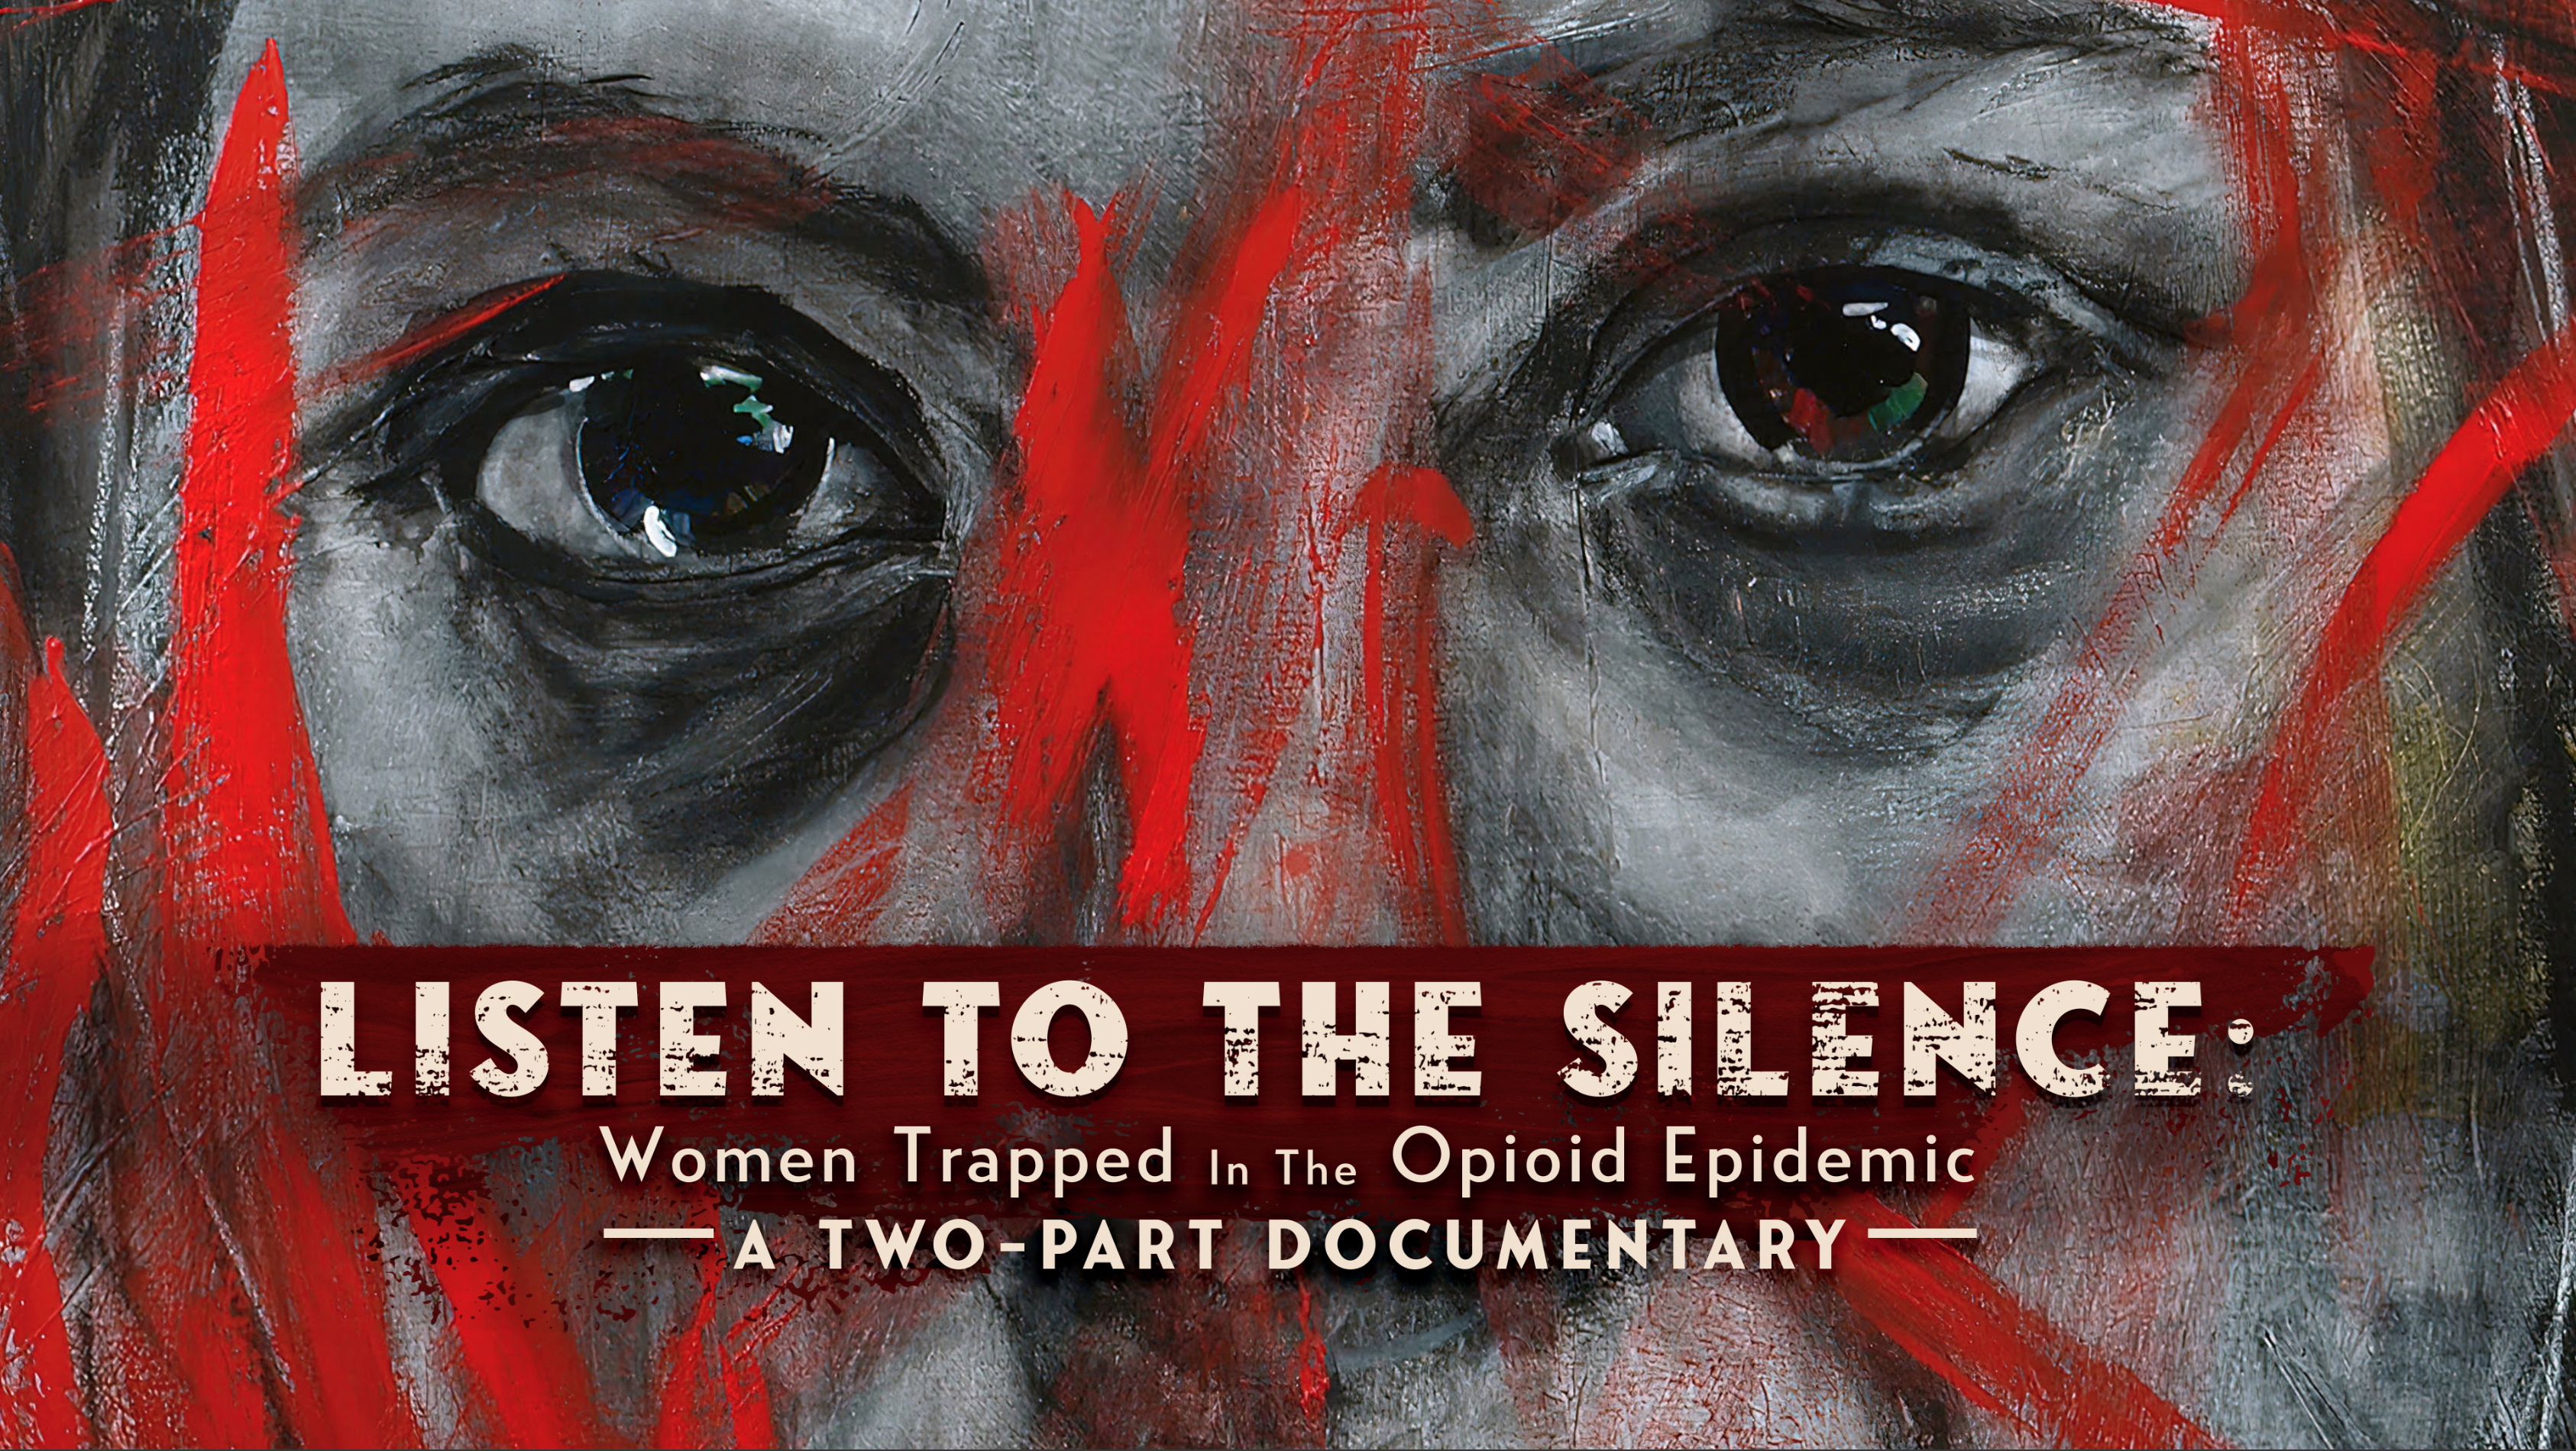 Listen To The Silence: Women Trapped in the Opioid Epidemic